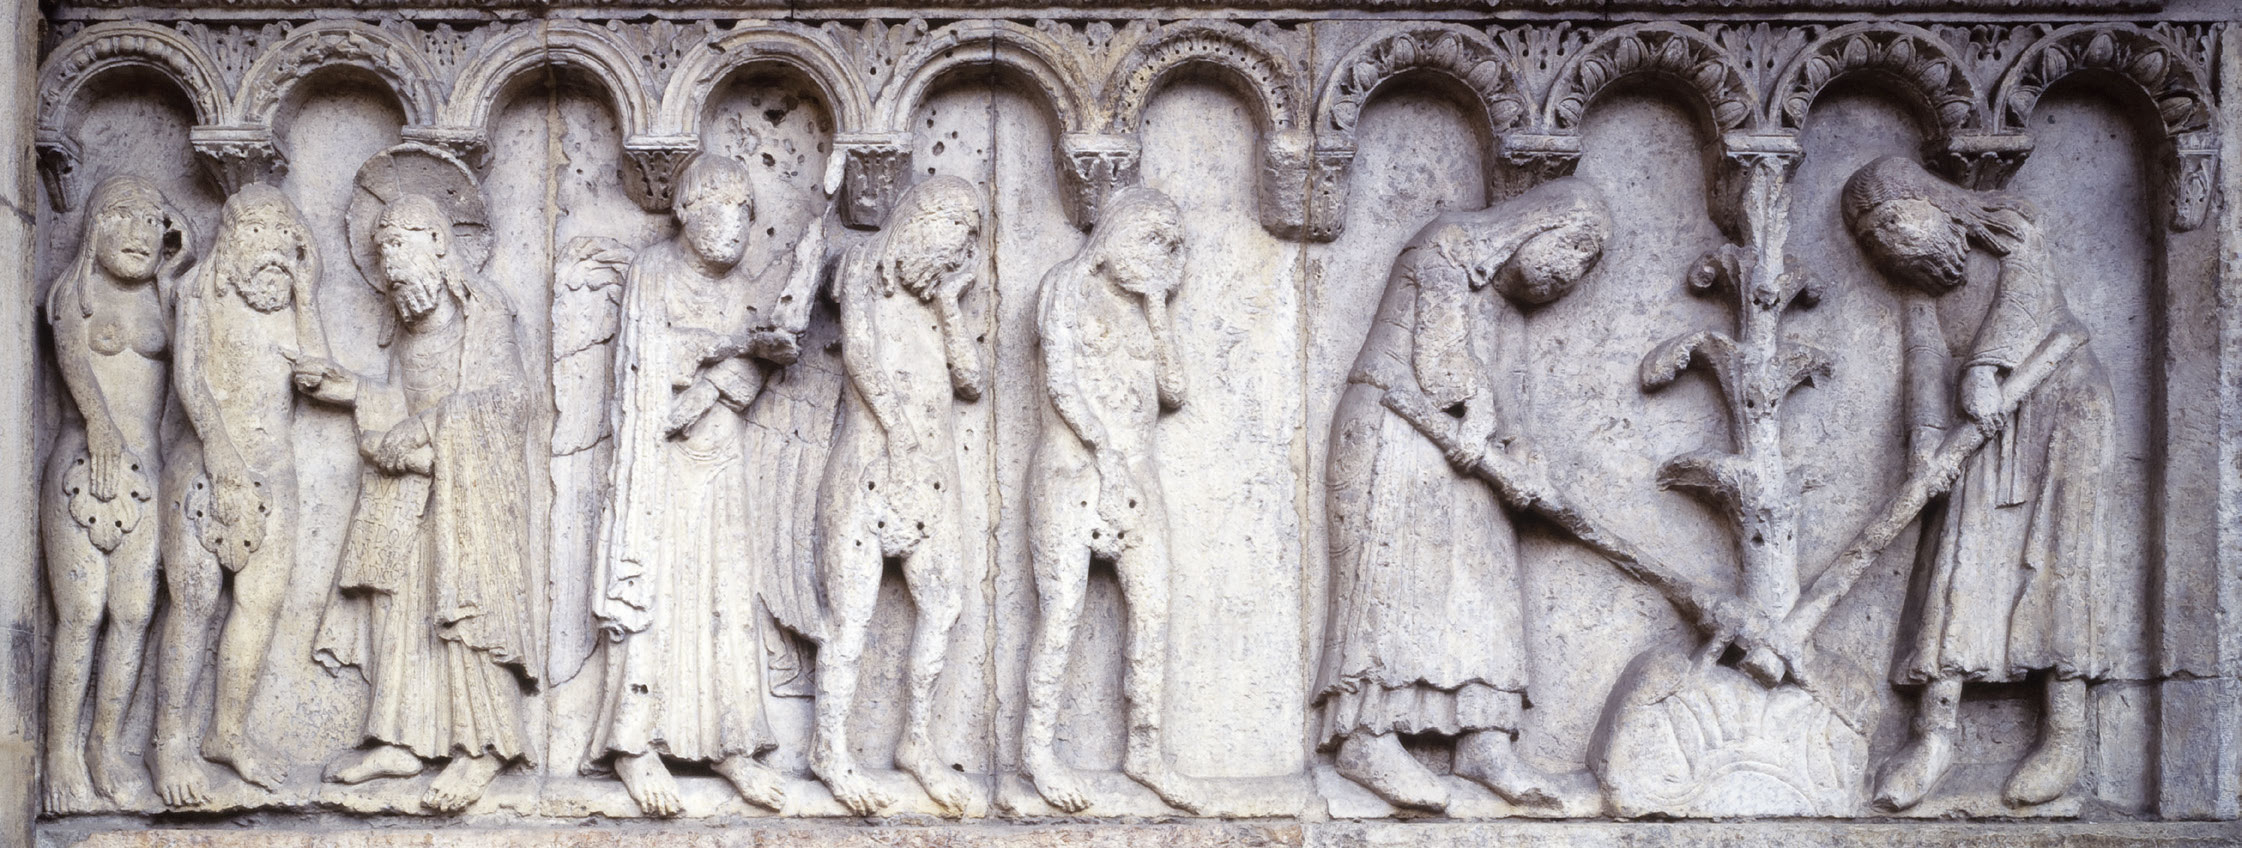 Wiligelmo, Stories from Genesis: God's rebuke, expulsion from Earthly Paradise, work (c. 1099-1110; Vicenza soft stone; Modena, Cathedral). Photo: Museums of the Cathedral of Modena